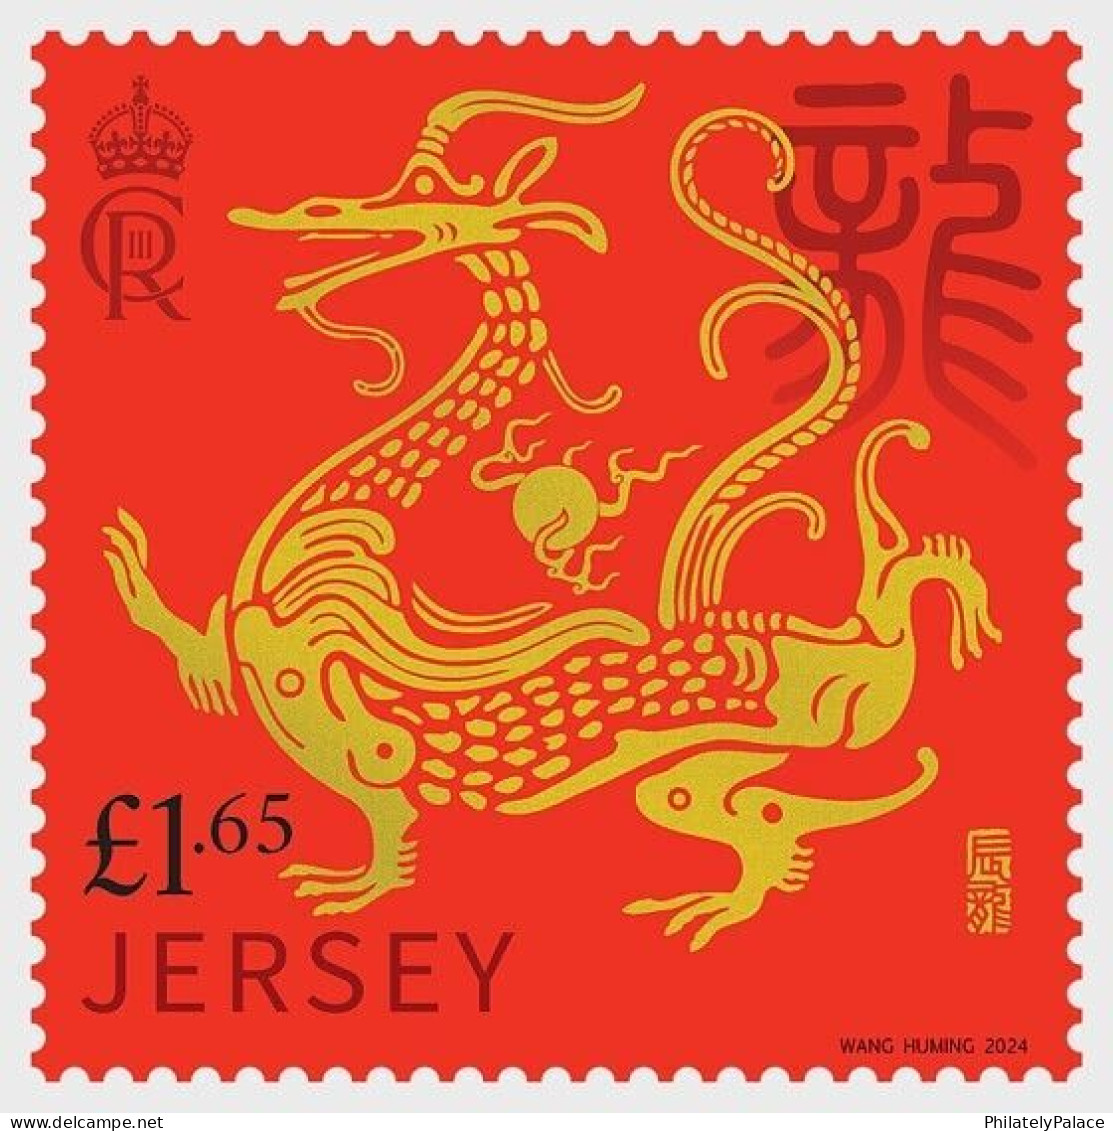 JERSEY 2024 ZODIAC, LUNAR YEAR OF DRAGON, COMP. SET OF 1 STAMP IN MINT MNH (**) - Nouvel An Chinois